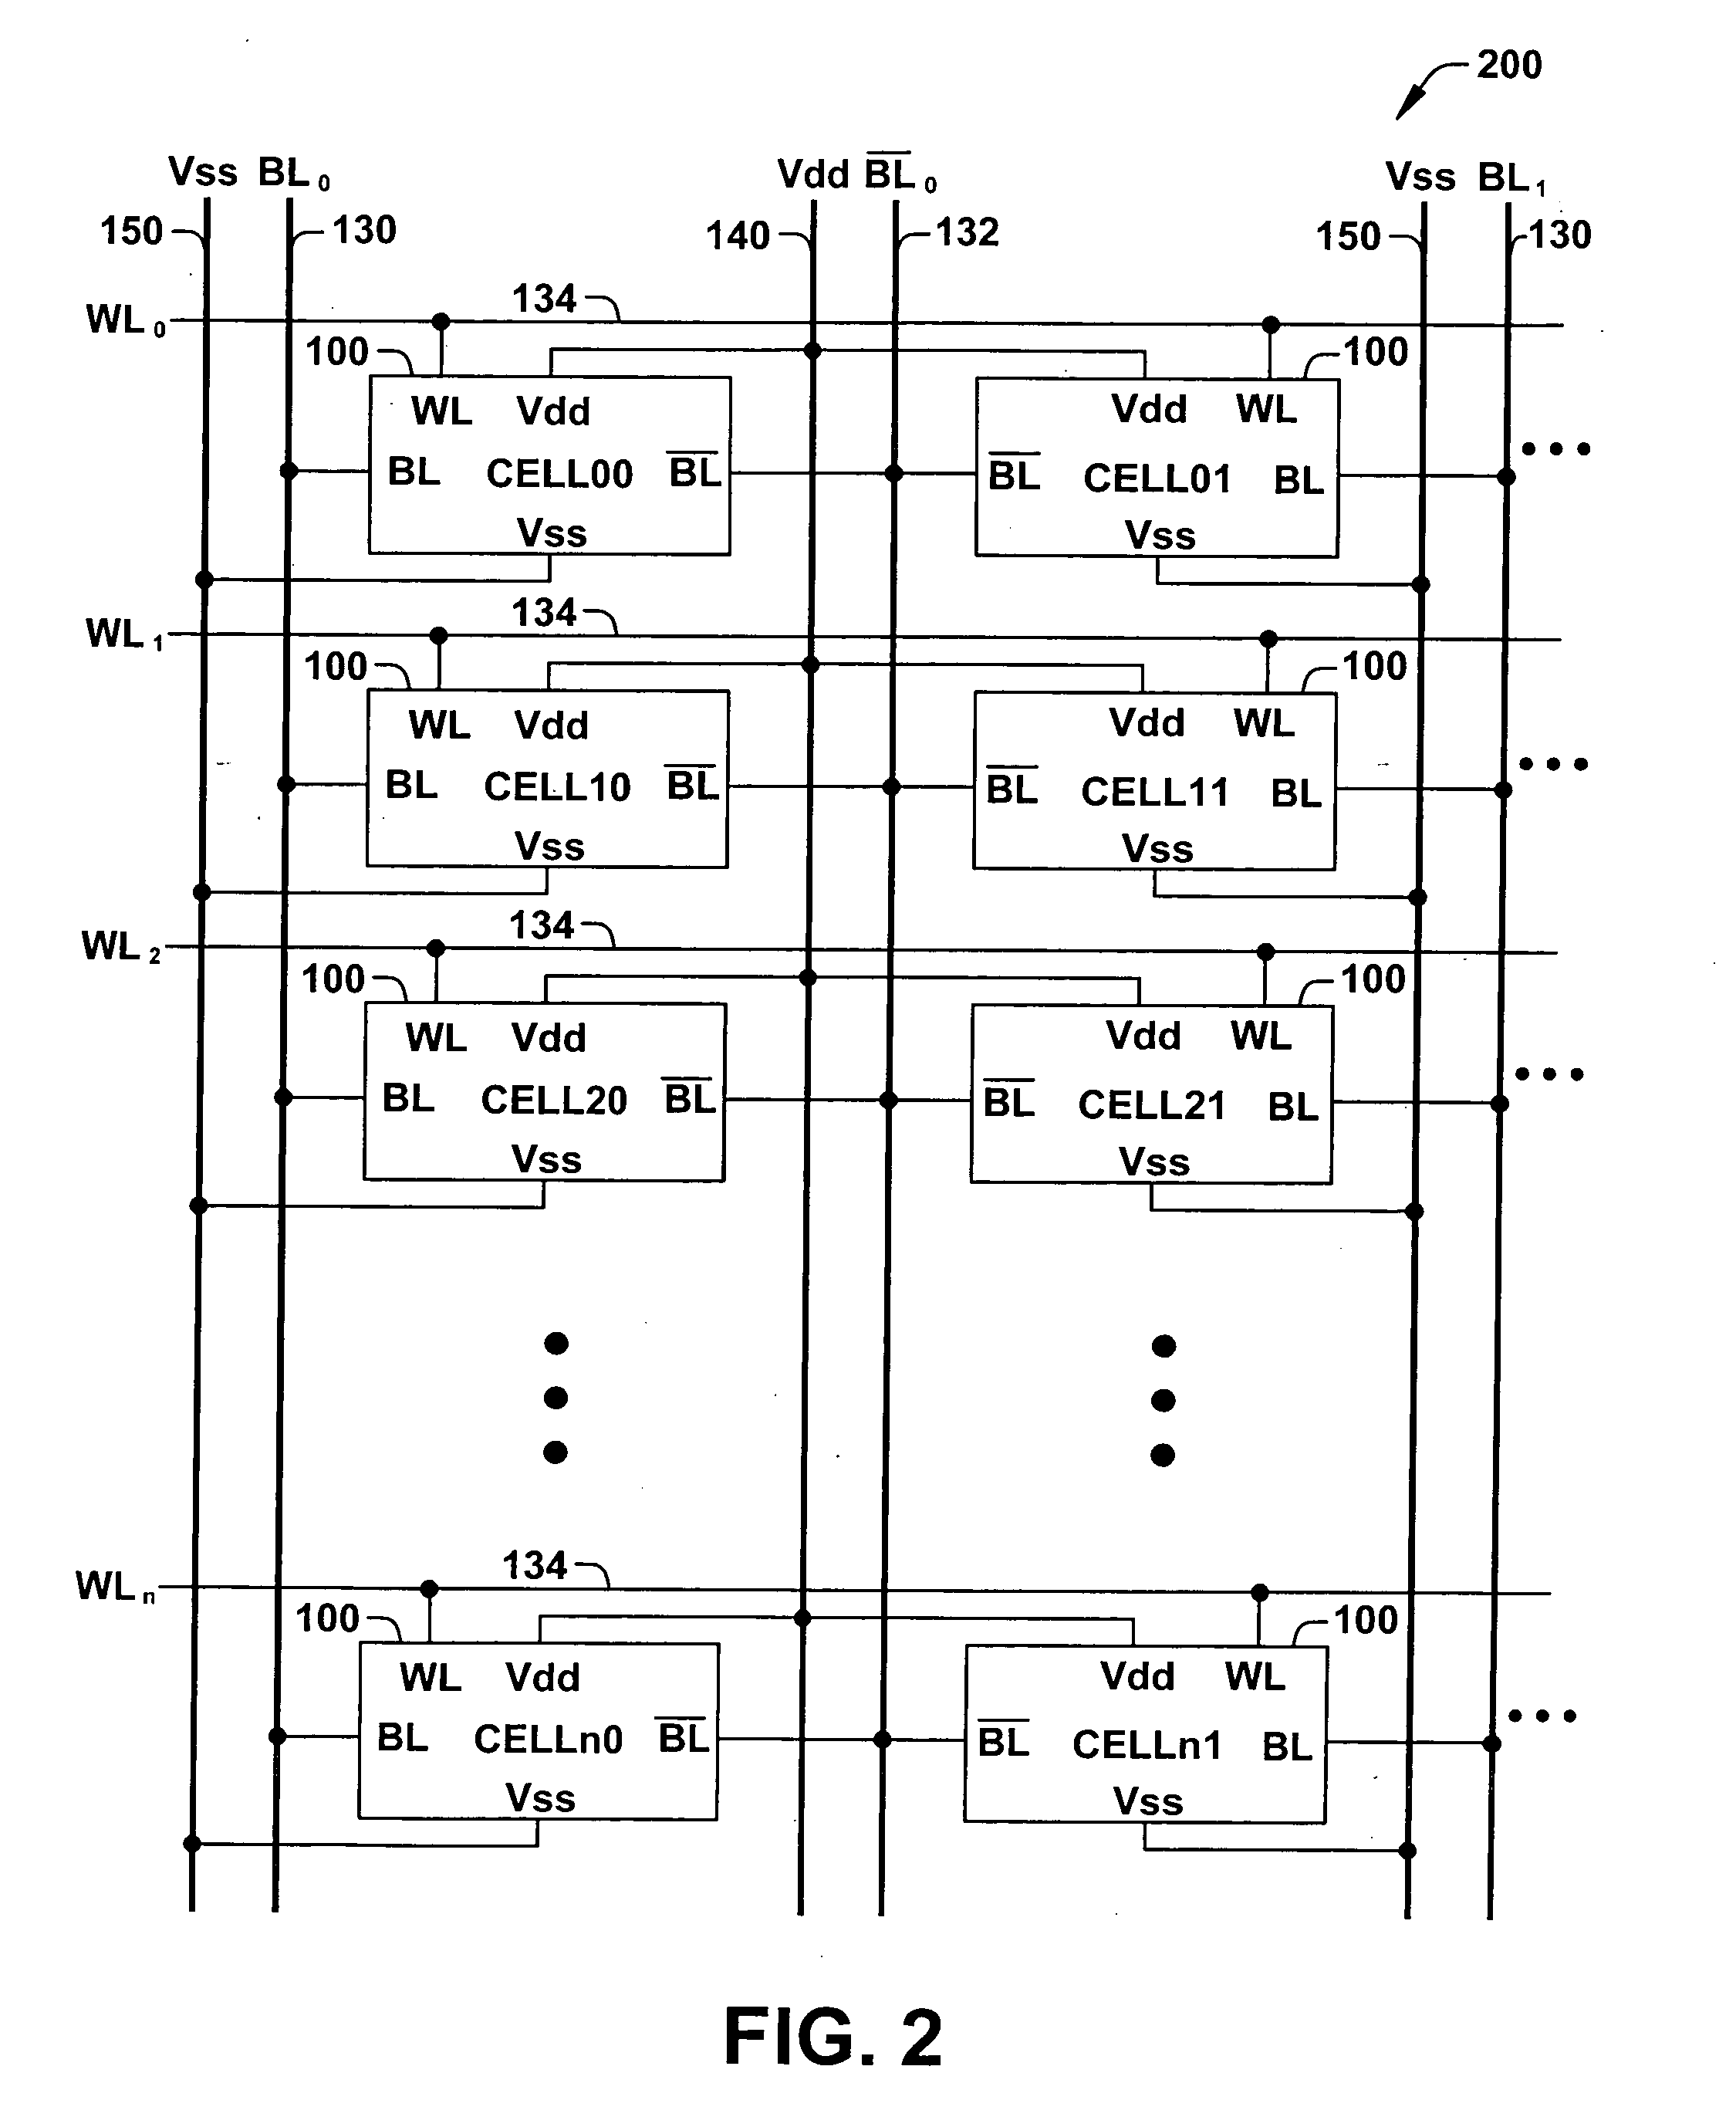 Area efficient implementation of small blocks in an SRAM array